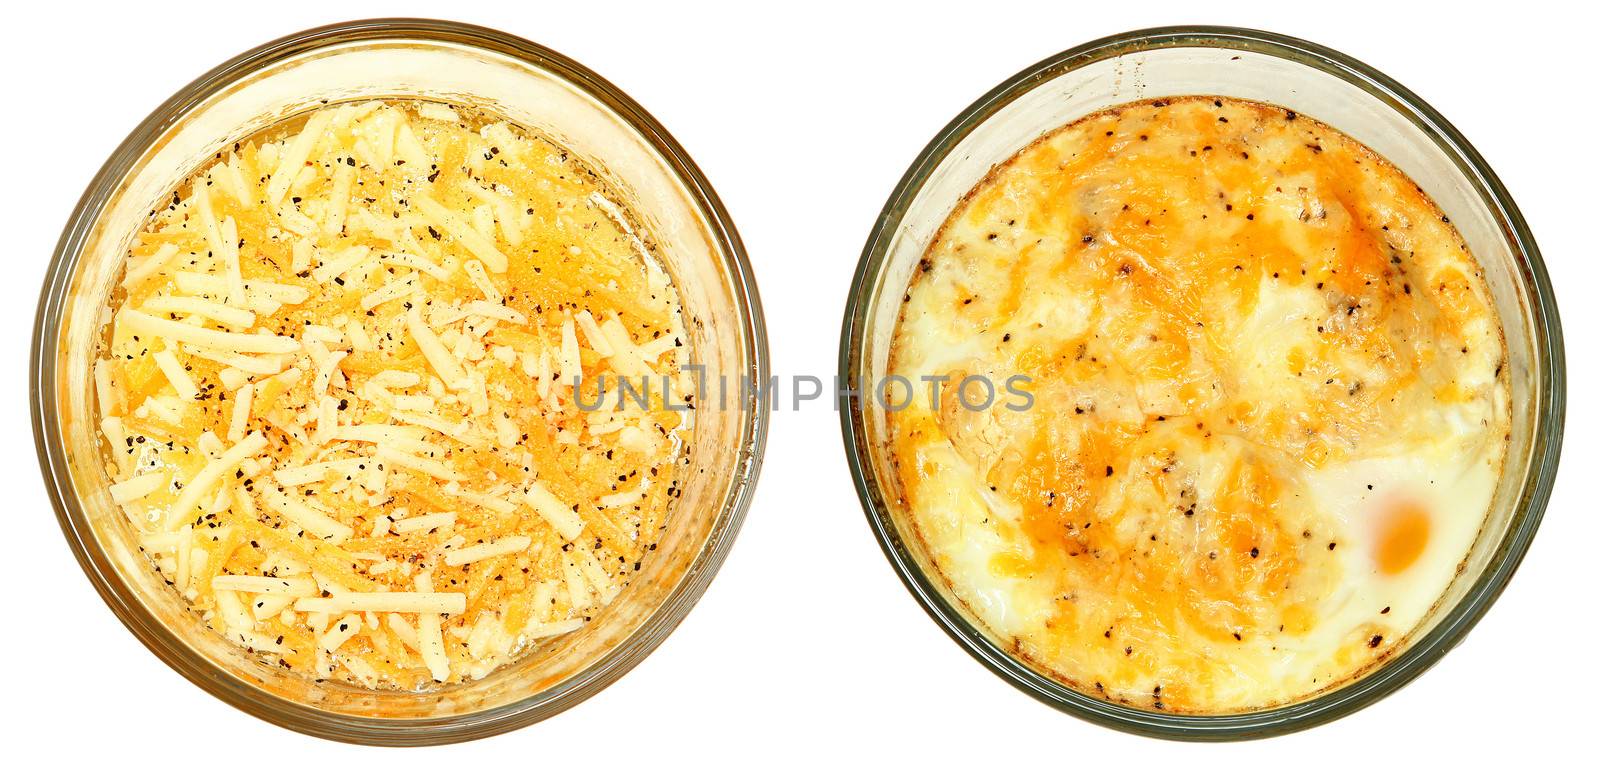 Before and After of Raw and Baked eggs with cheese and pepper.